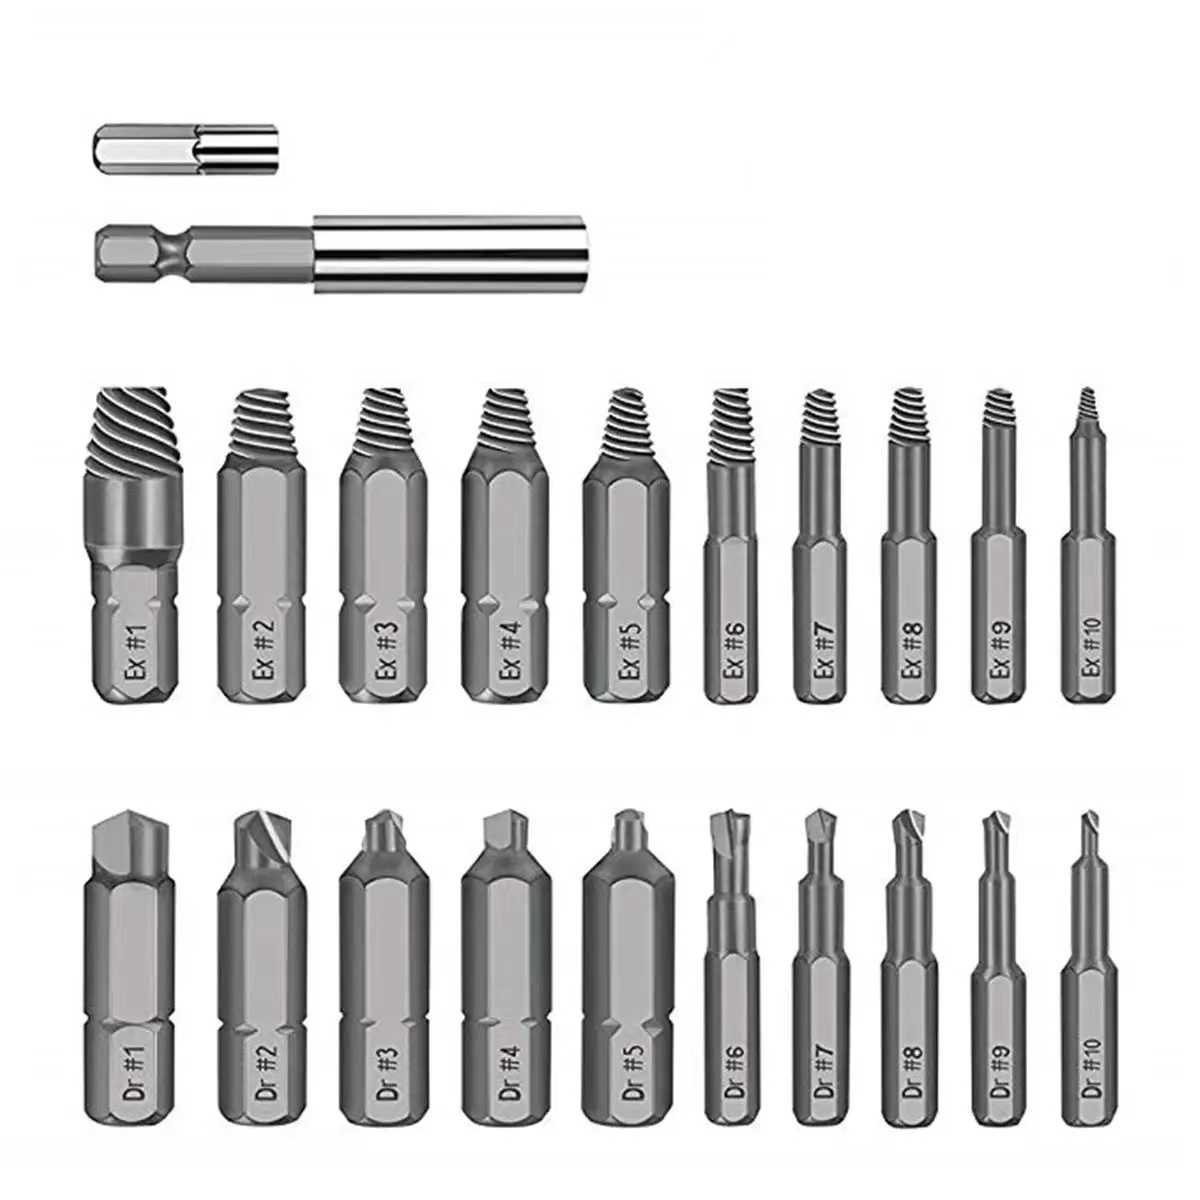 (A) screw remove bit hex bolt pulling out ... becoming useless . broken screw remove tool extract tractor impact drill driver 